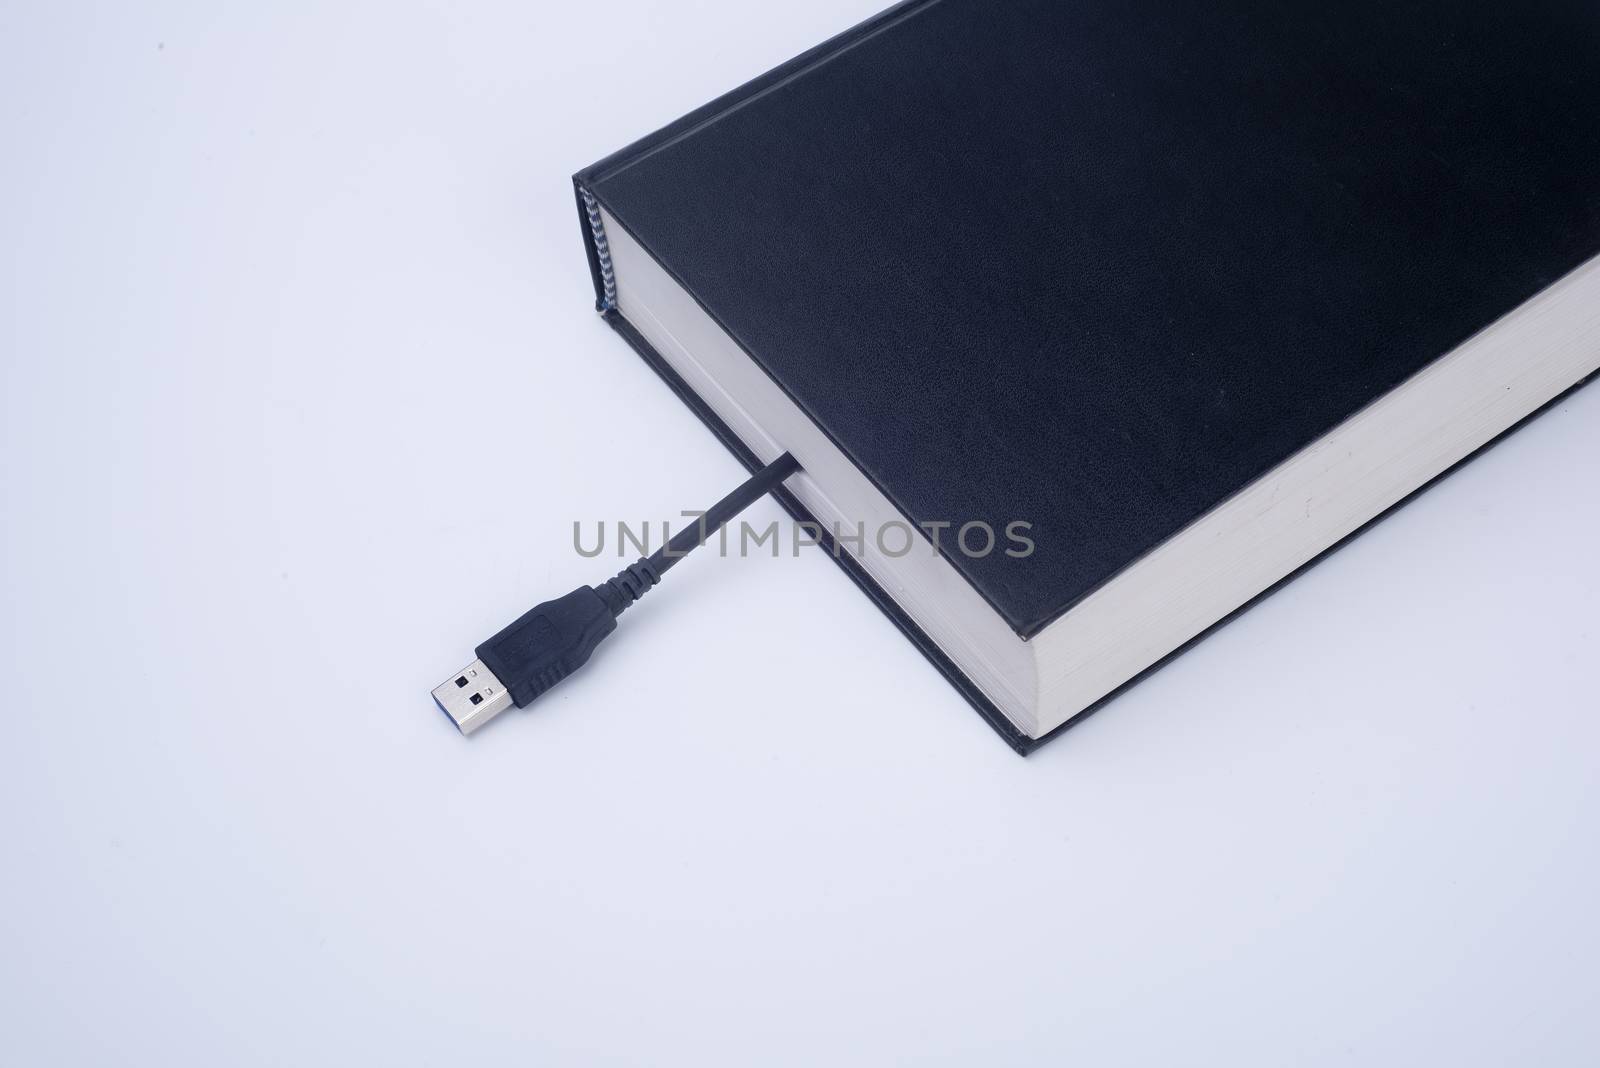 A book with an USB socket